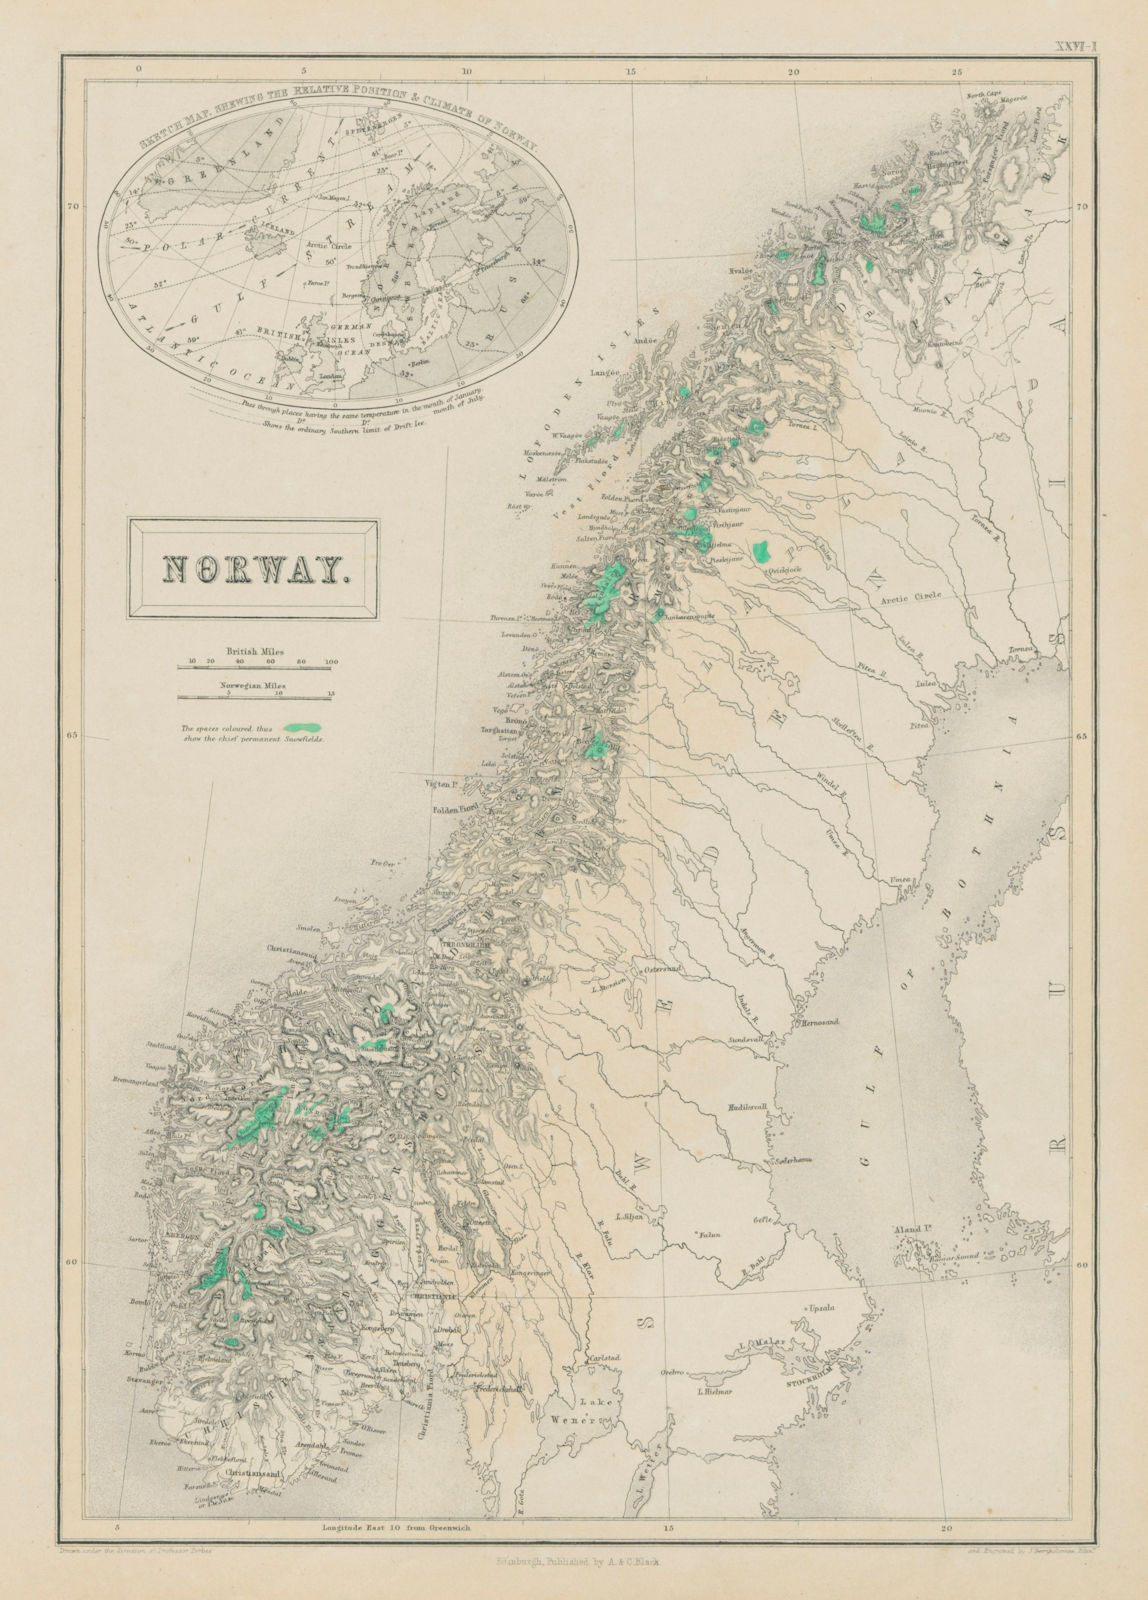 Norway showing "permanent snowfields" (glaciers) in green. BARTHOLOMEW 1856 map